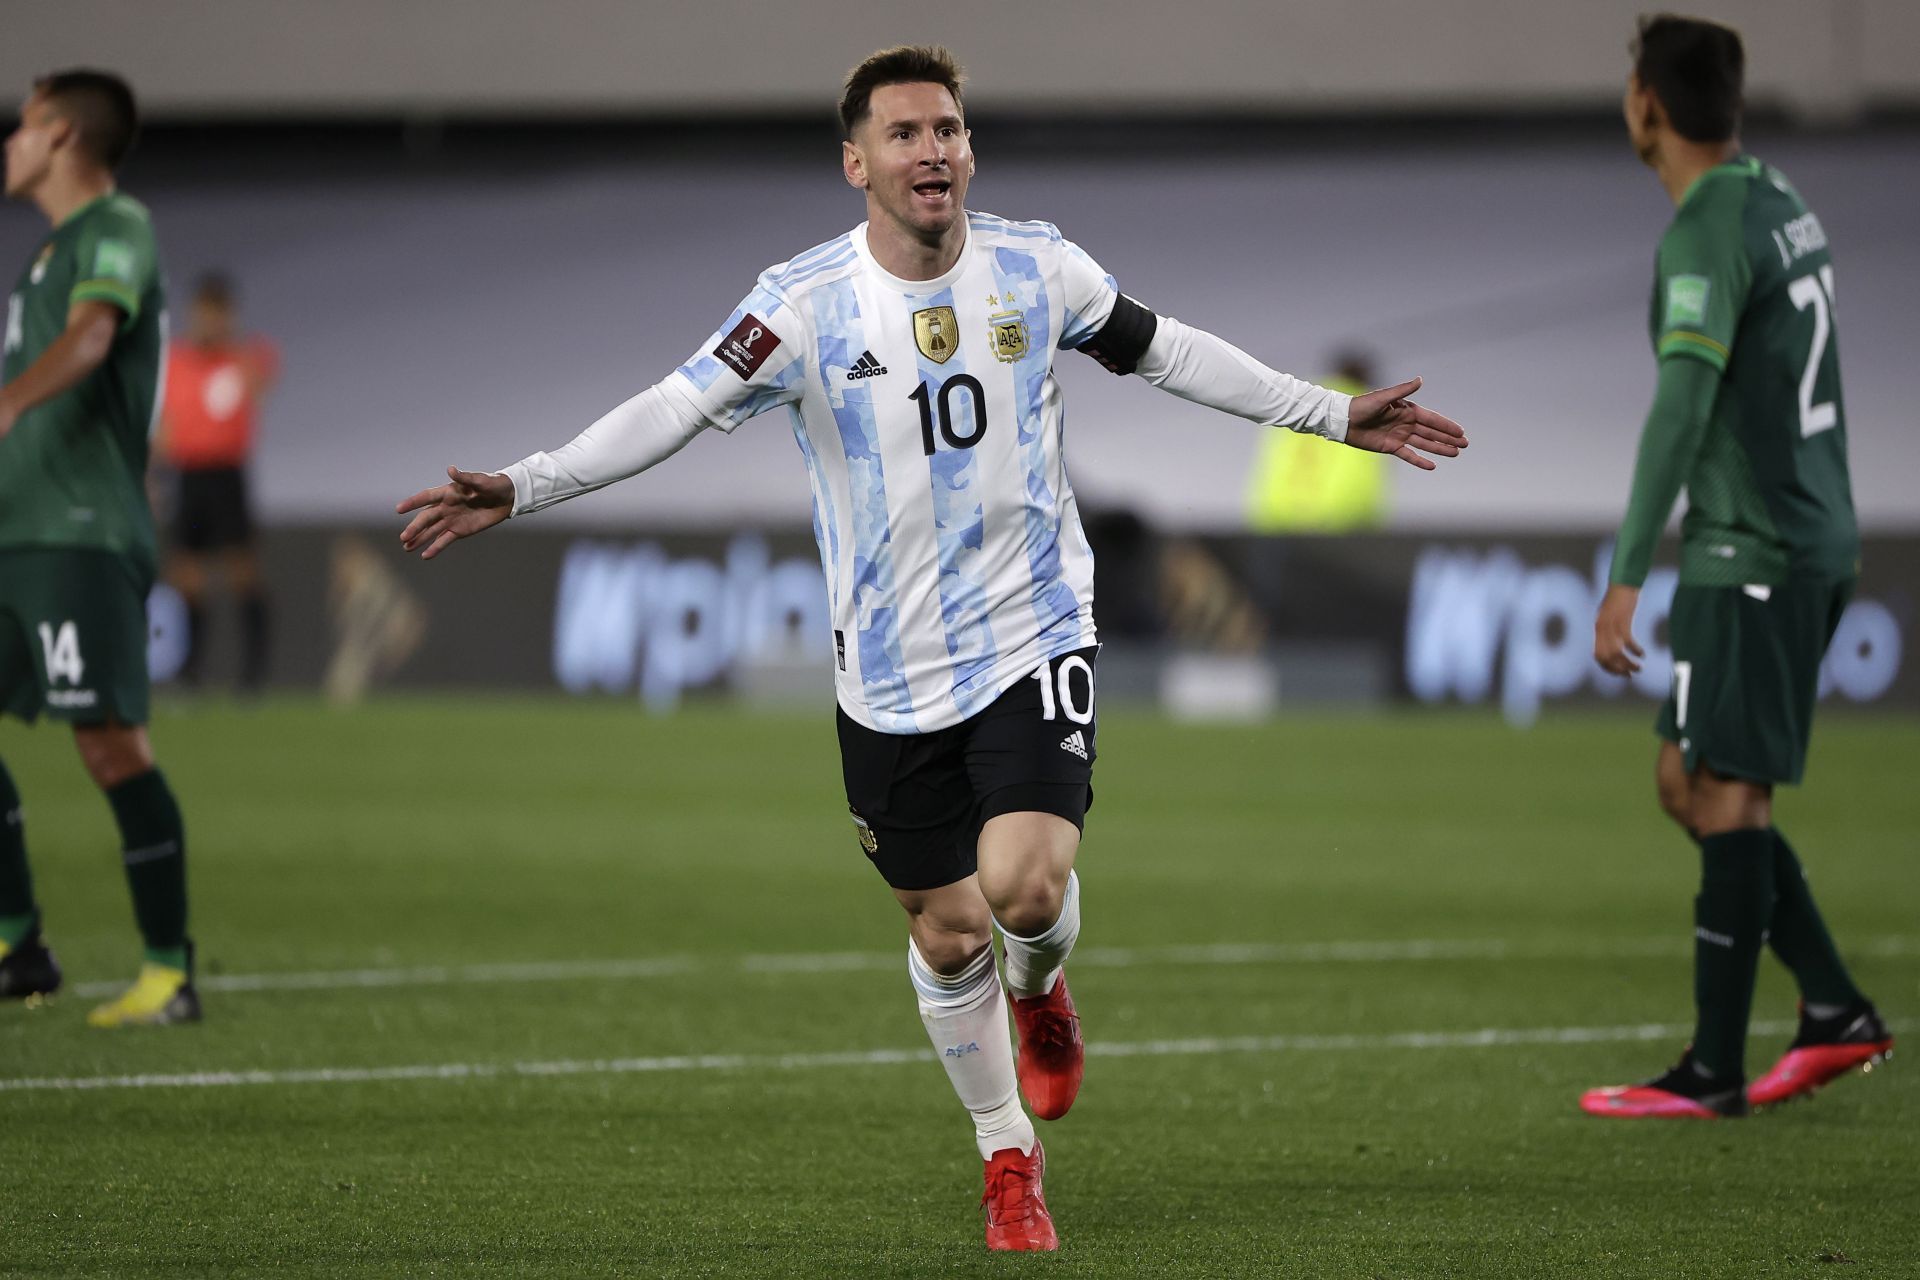 Lionel Messi is regarded by many as the best footballer from South America who is still playing